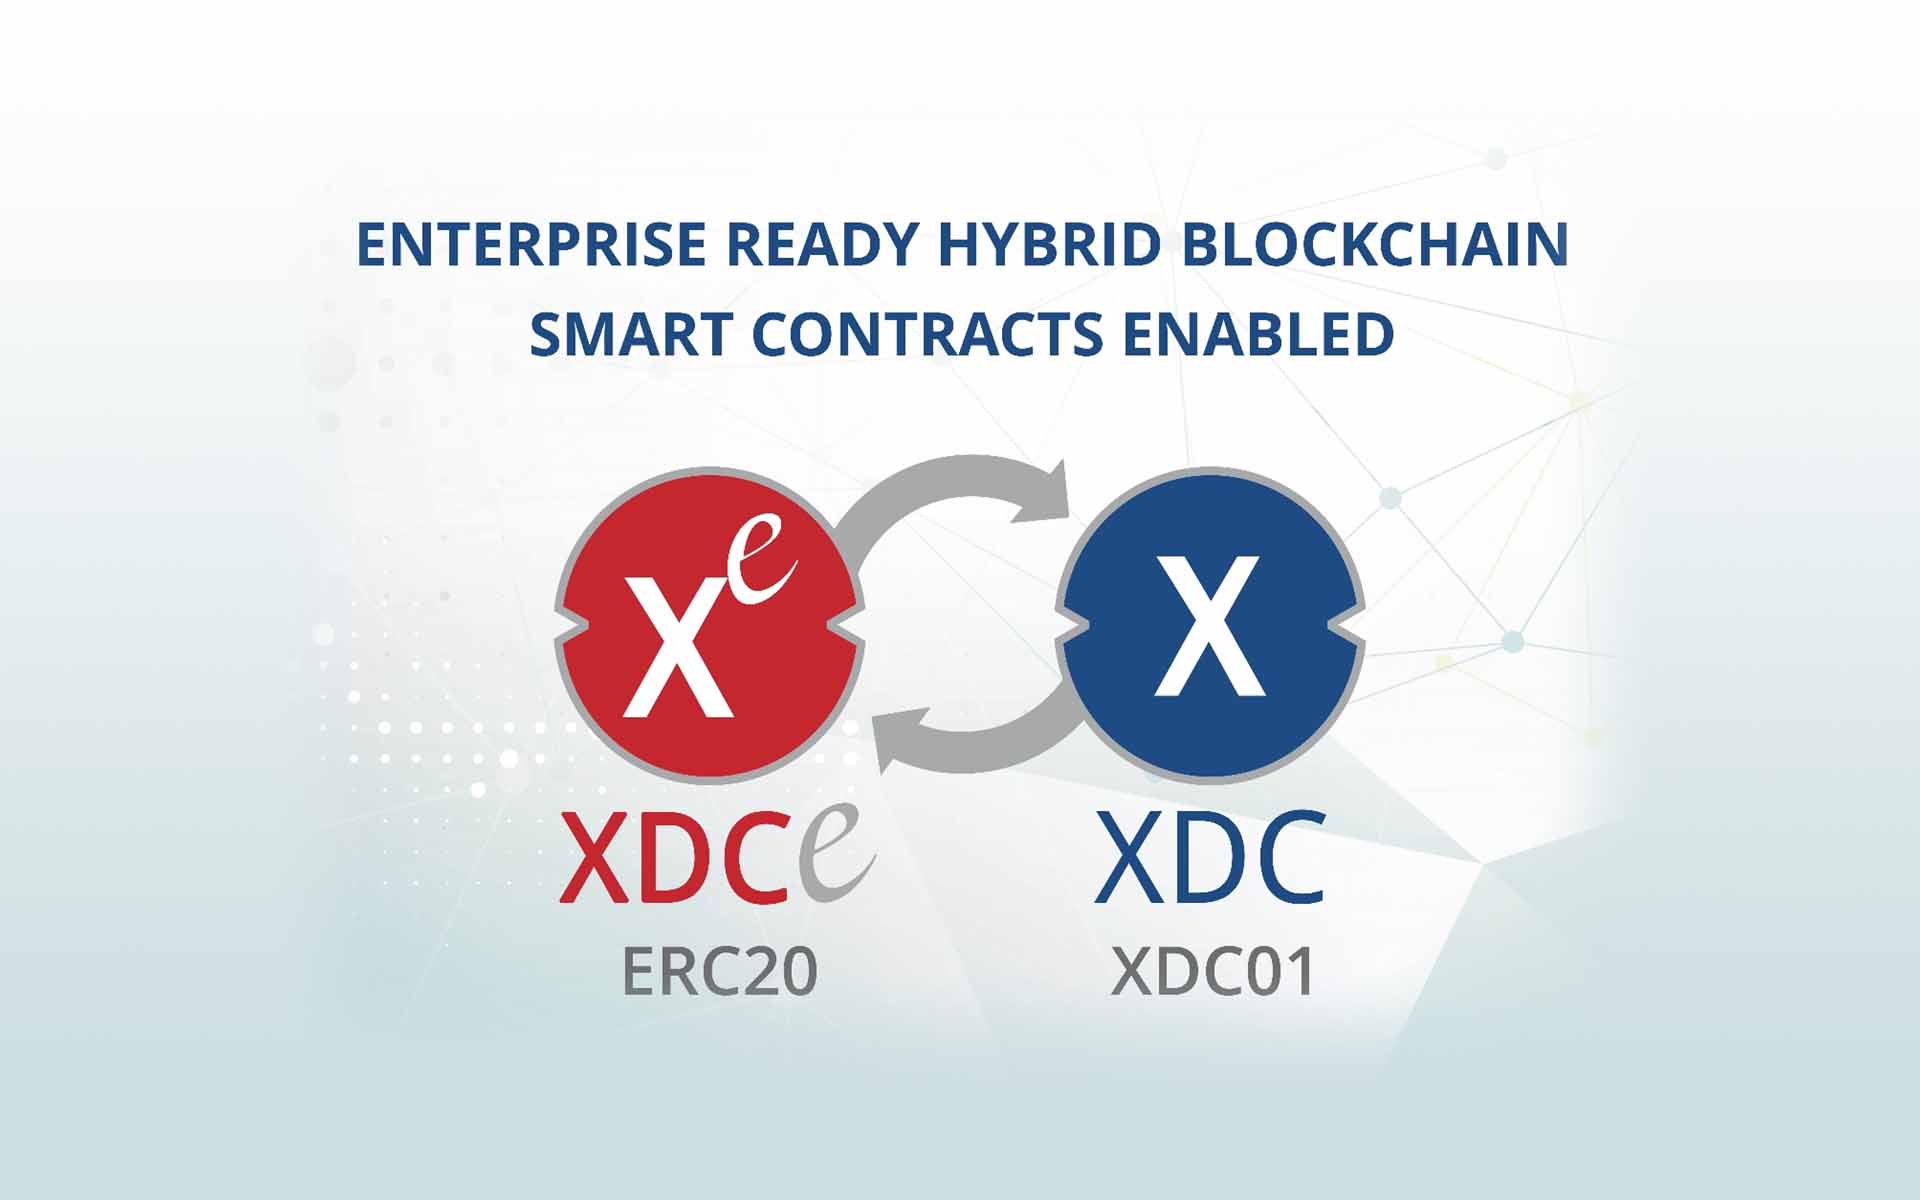 XDCE Token Goes Live on Exchanges like Bancor, KoinOK, Alphaex, Forkdelta & Etherflyer Opens 20% Above the Token Contribution Price